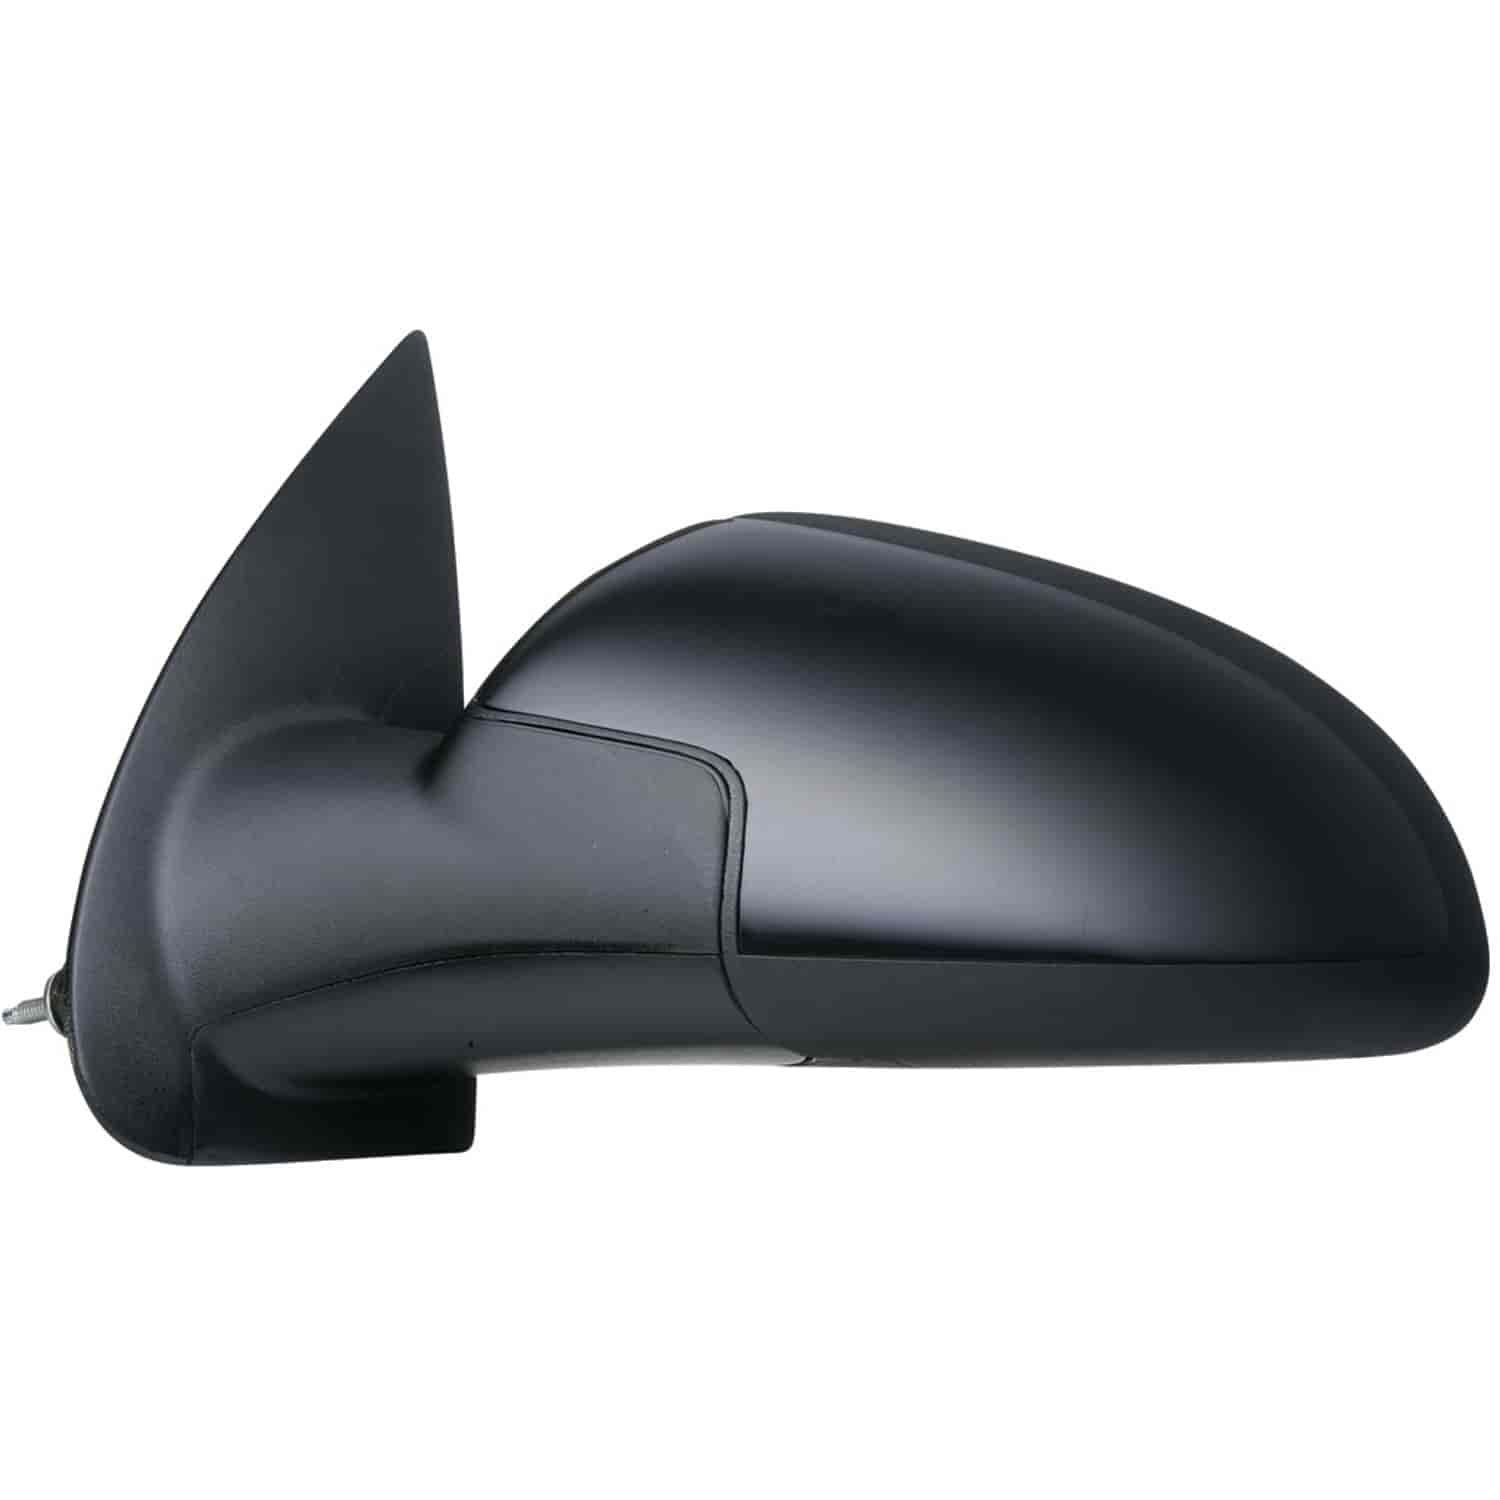 OEM Style Replacement mirror for 05-10 Chevrolet Cobalt Sedan driver side mirror tested to fit and f